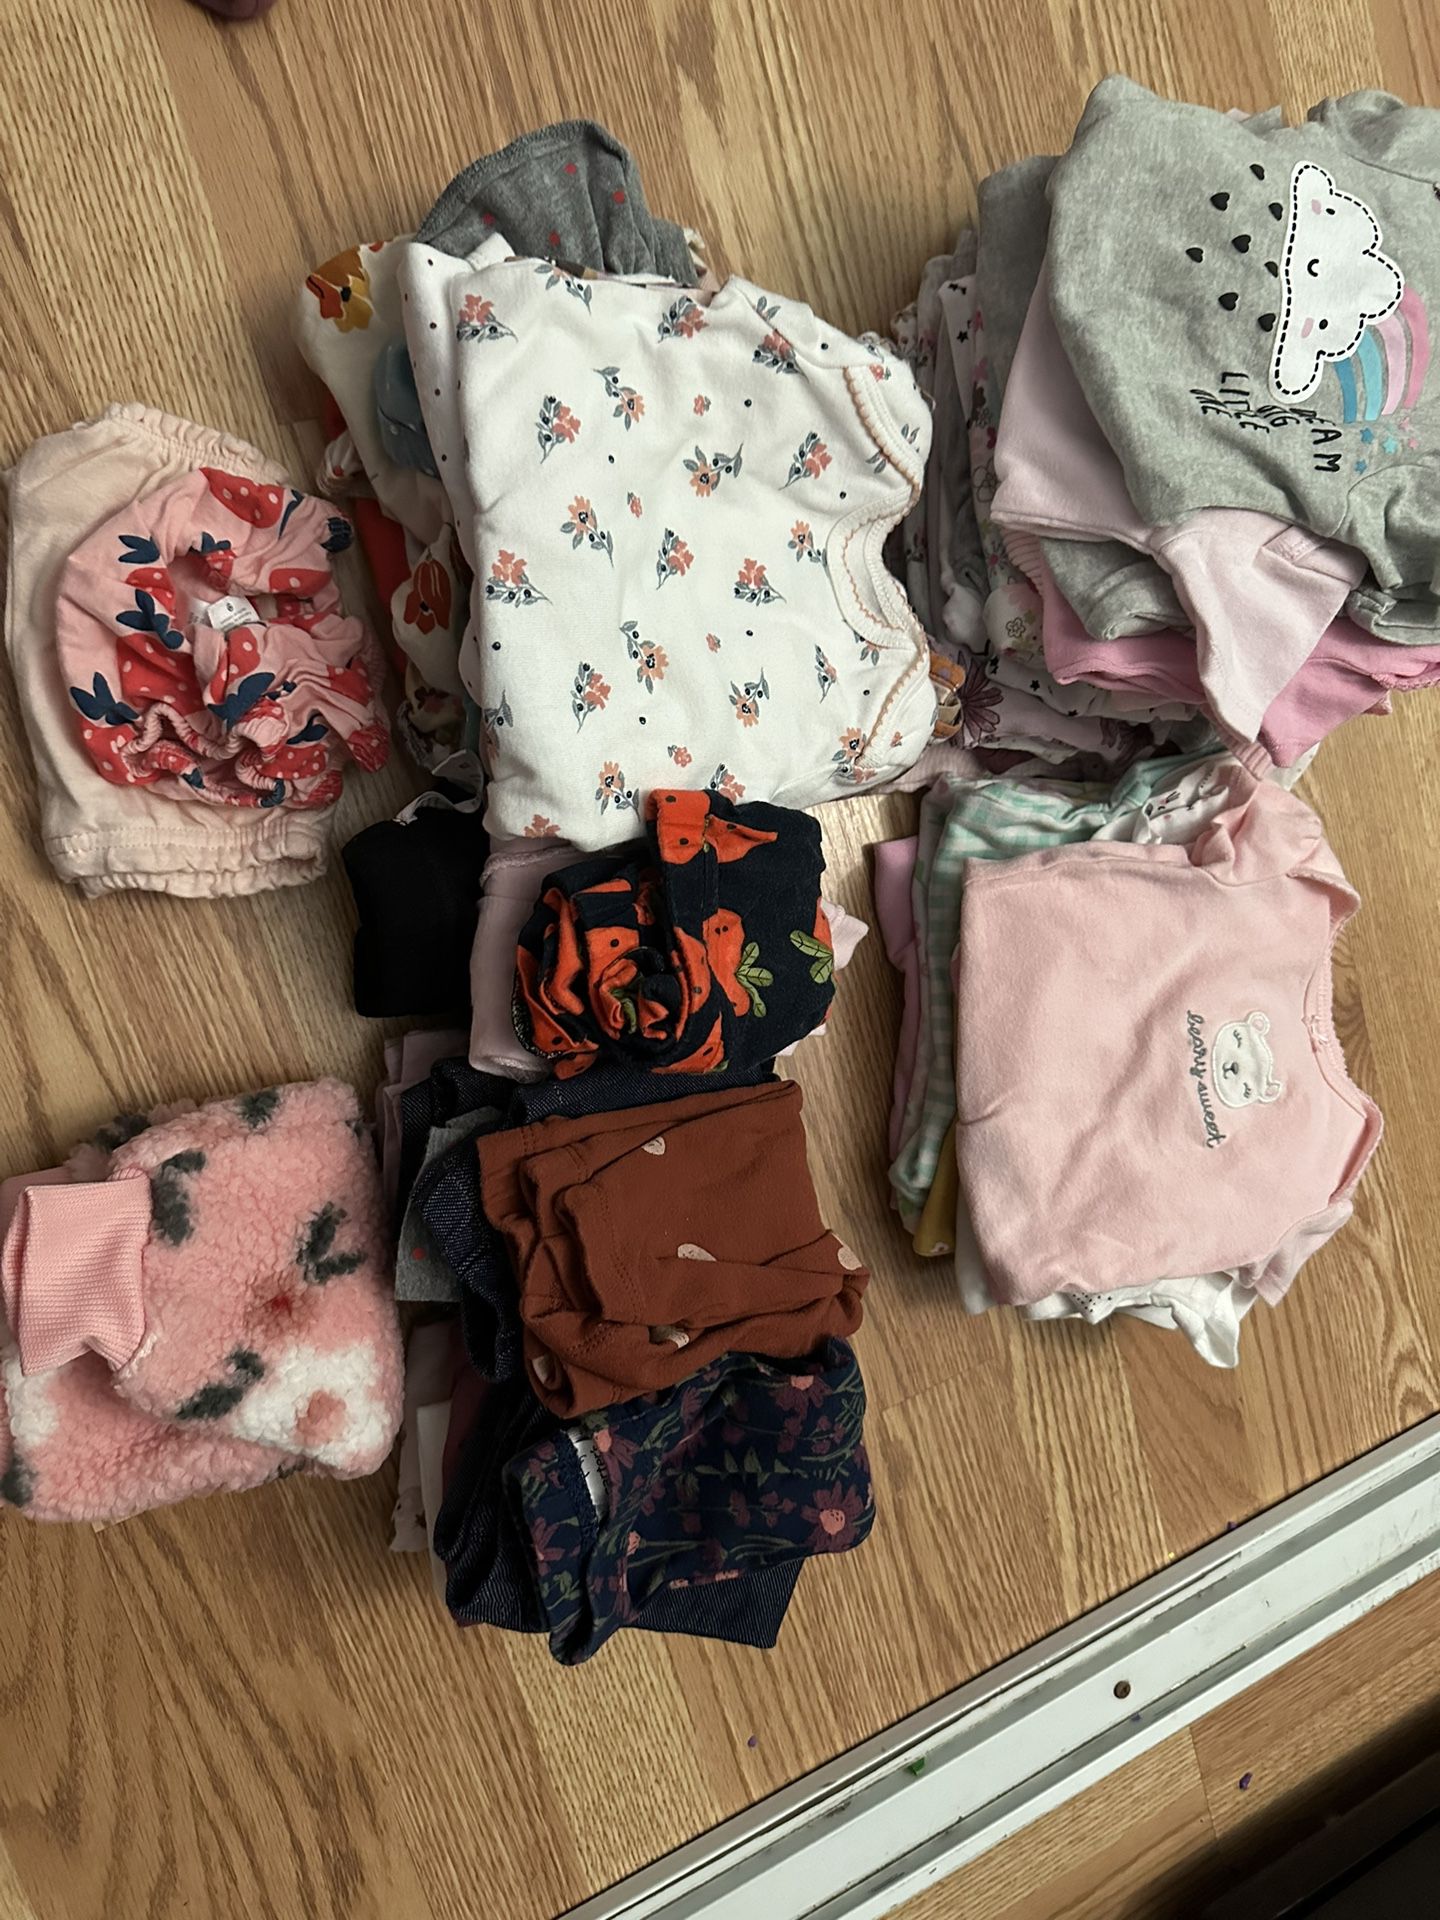 3 Month Baby Girl Lot 